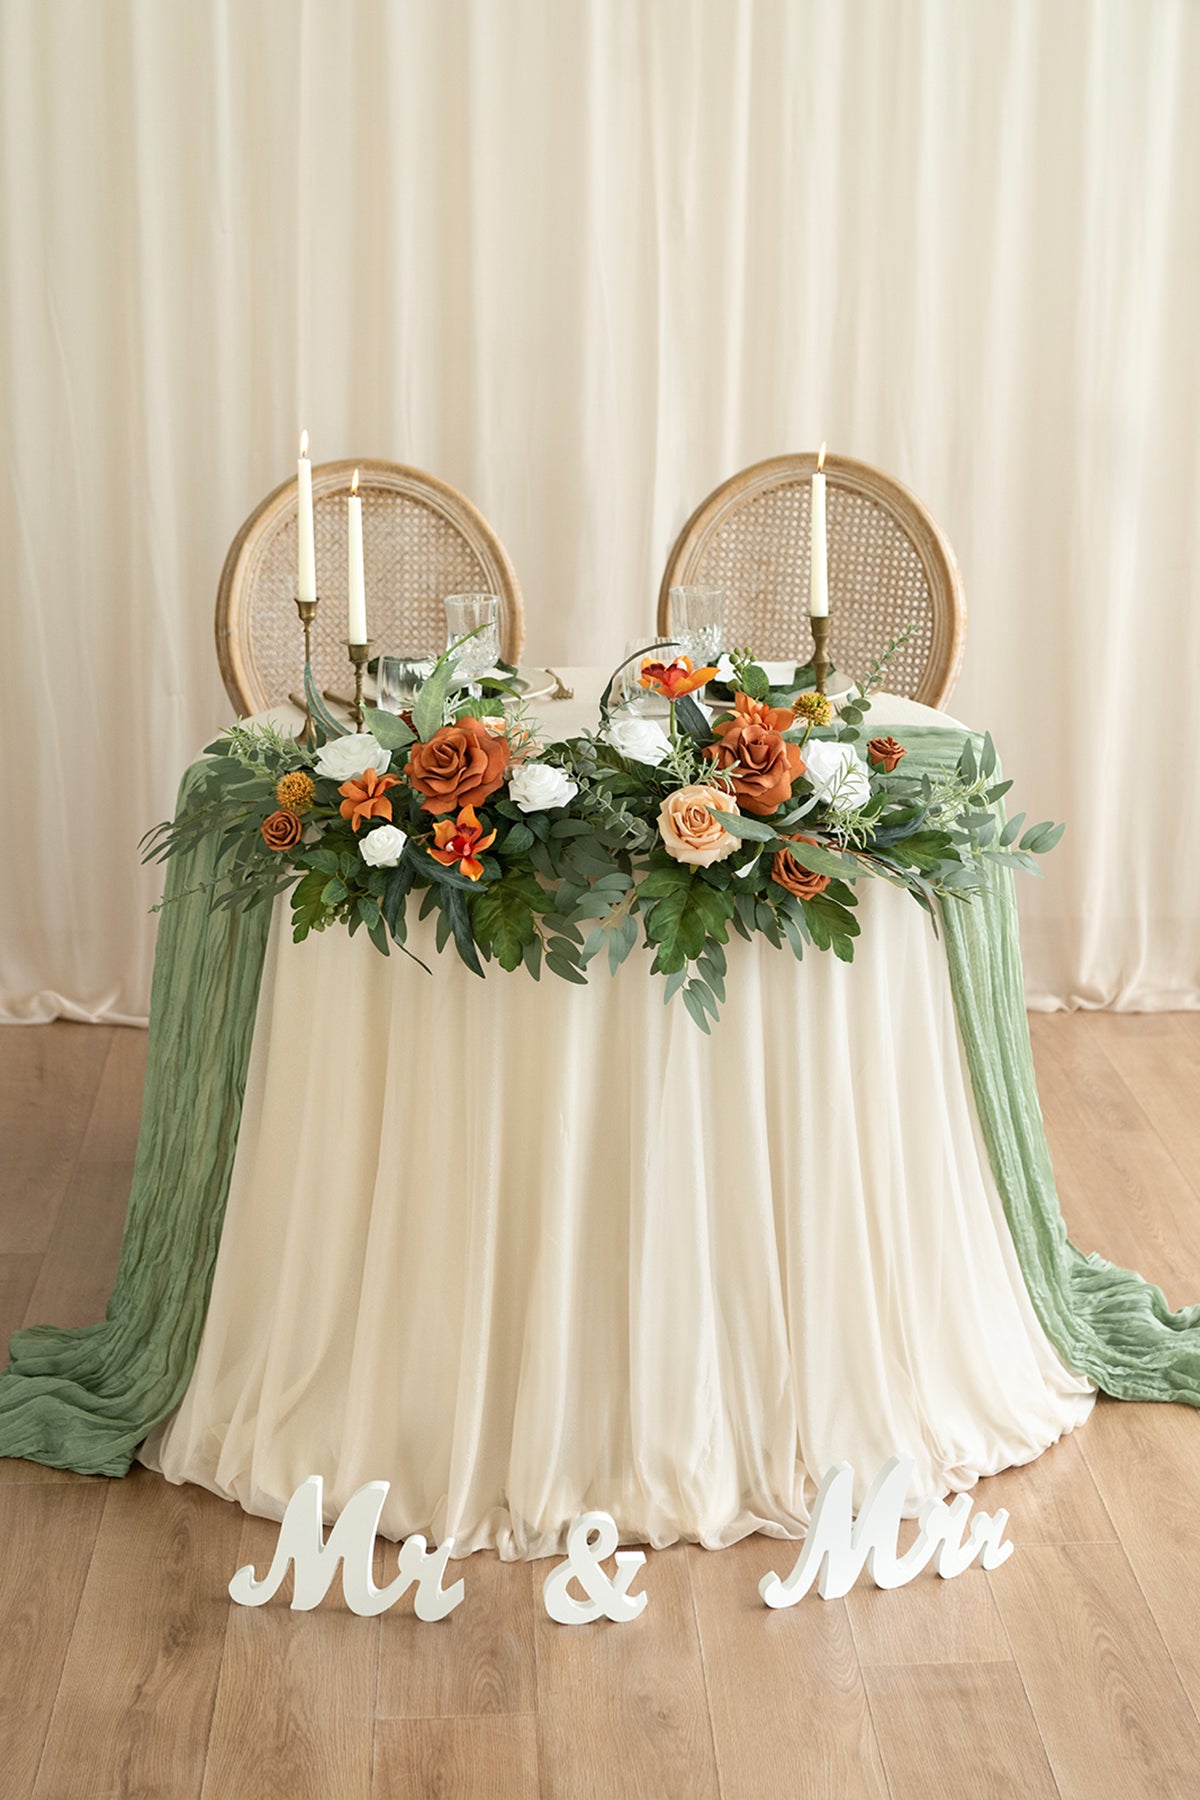 Head Table Floral Swags in Orange & Olive Green